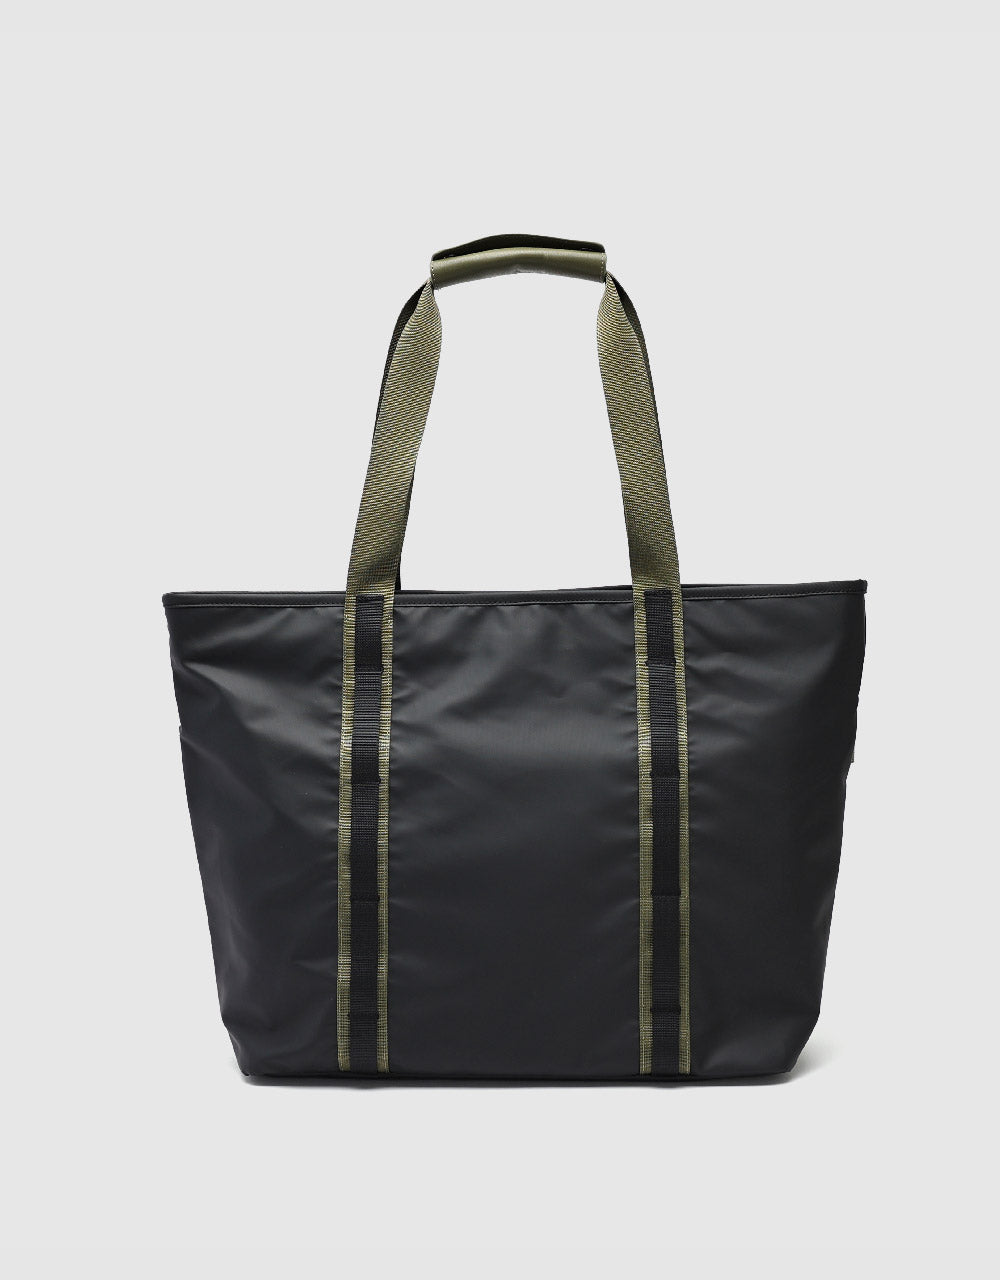 Two Toned Tote Bag